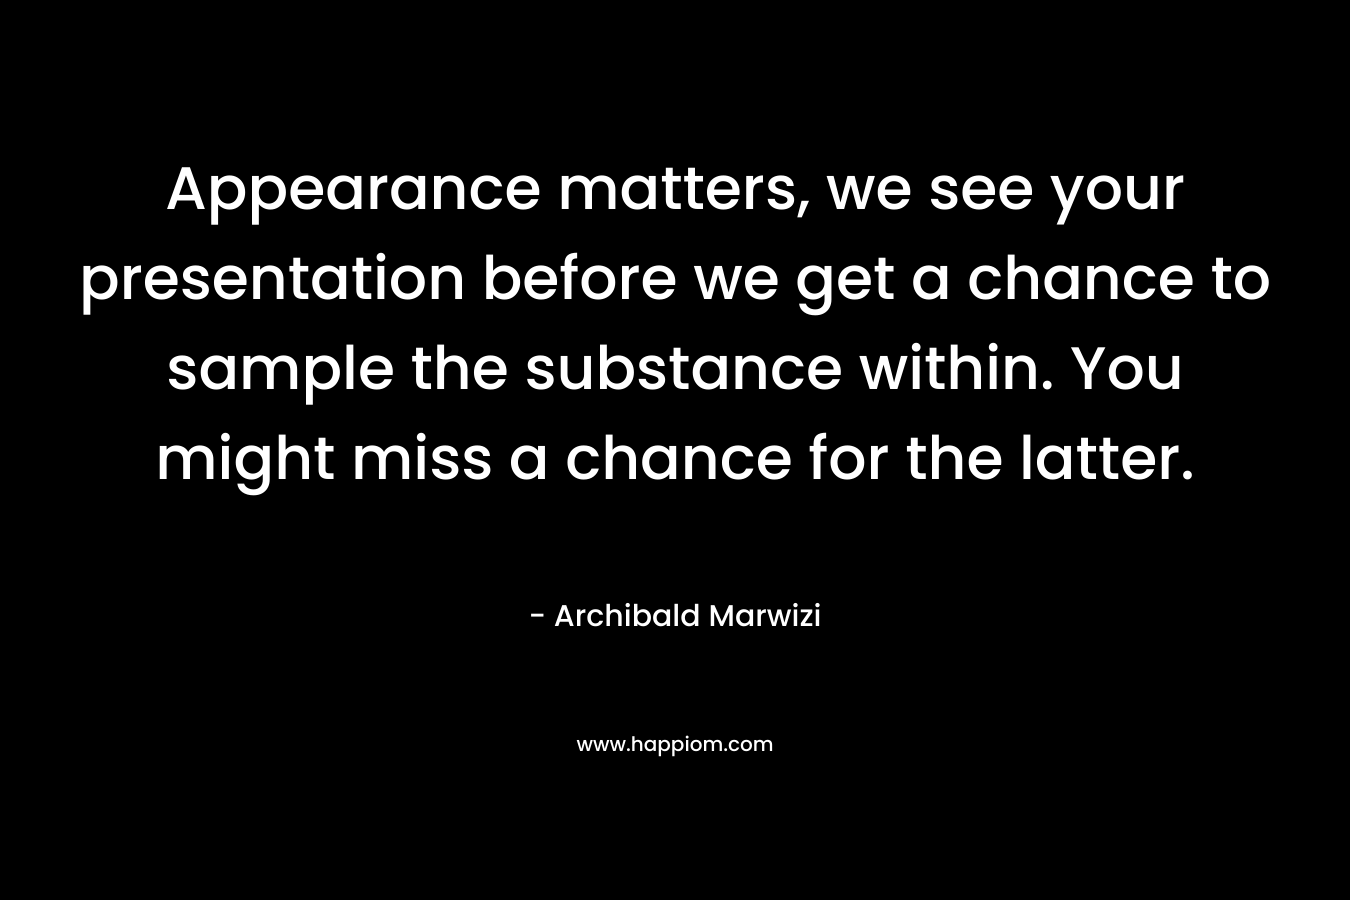 Appearance matters, we see your presentation before we get a chance to sample the substance within. You might miss a chance for the latter. – Archibald Marwizi